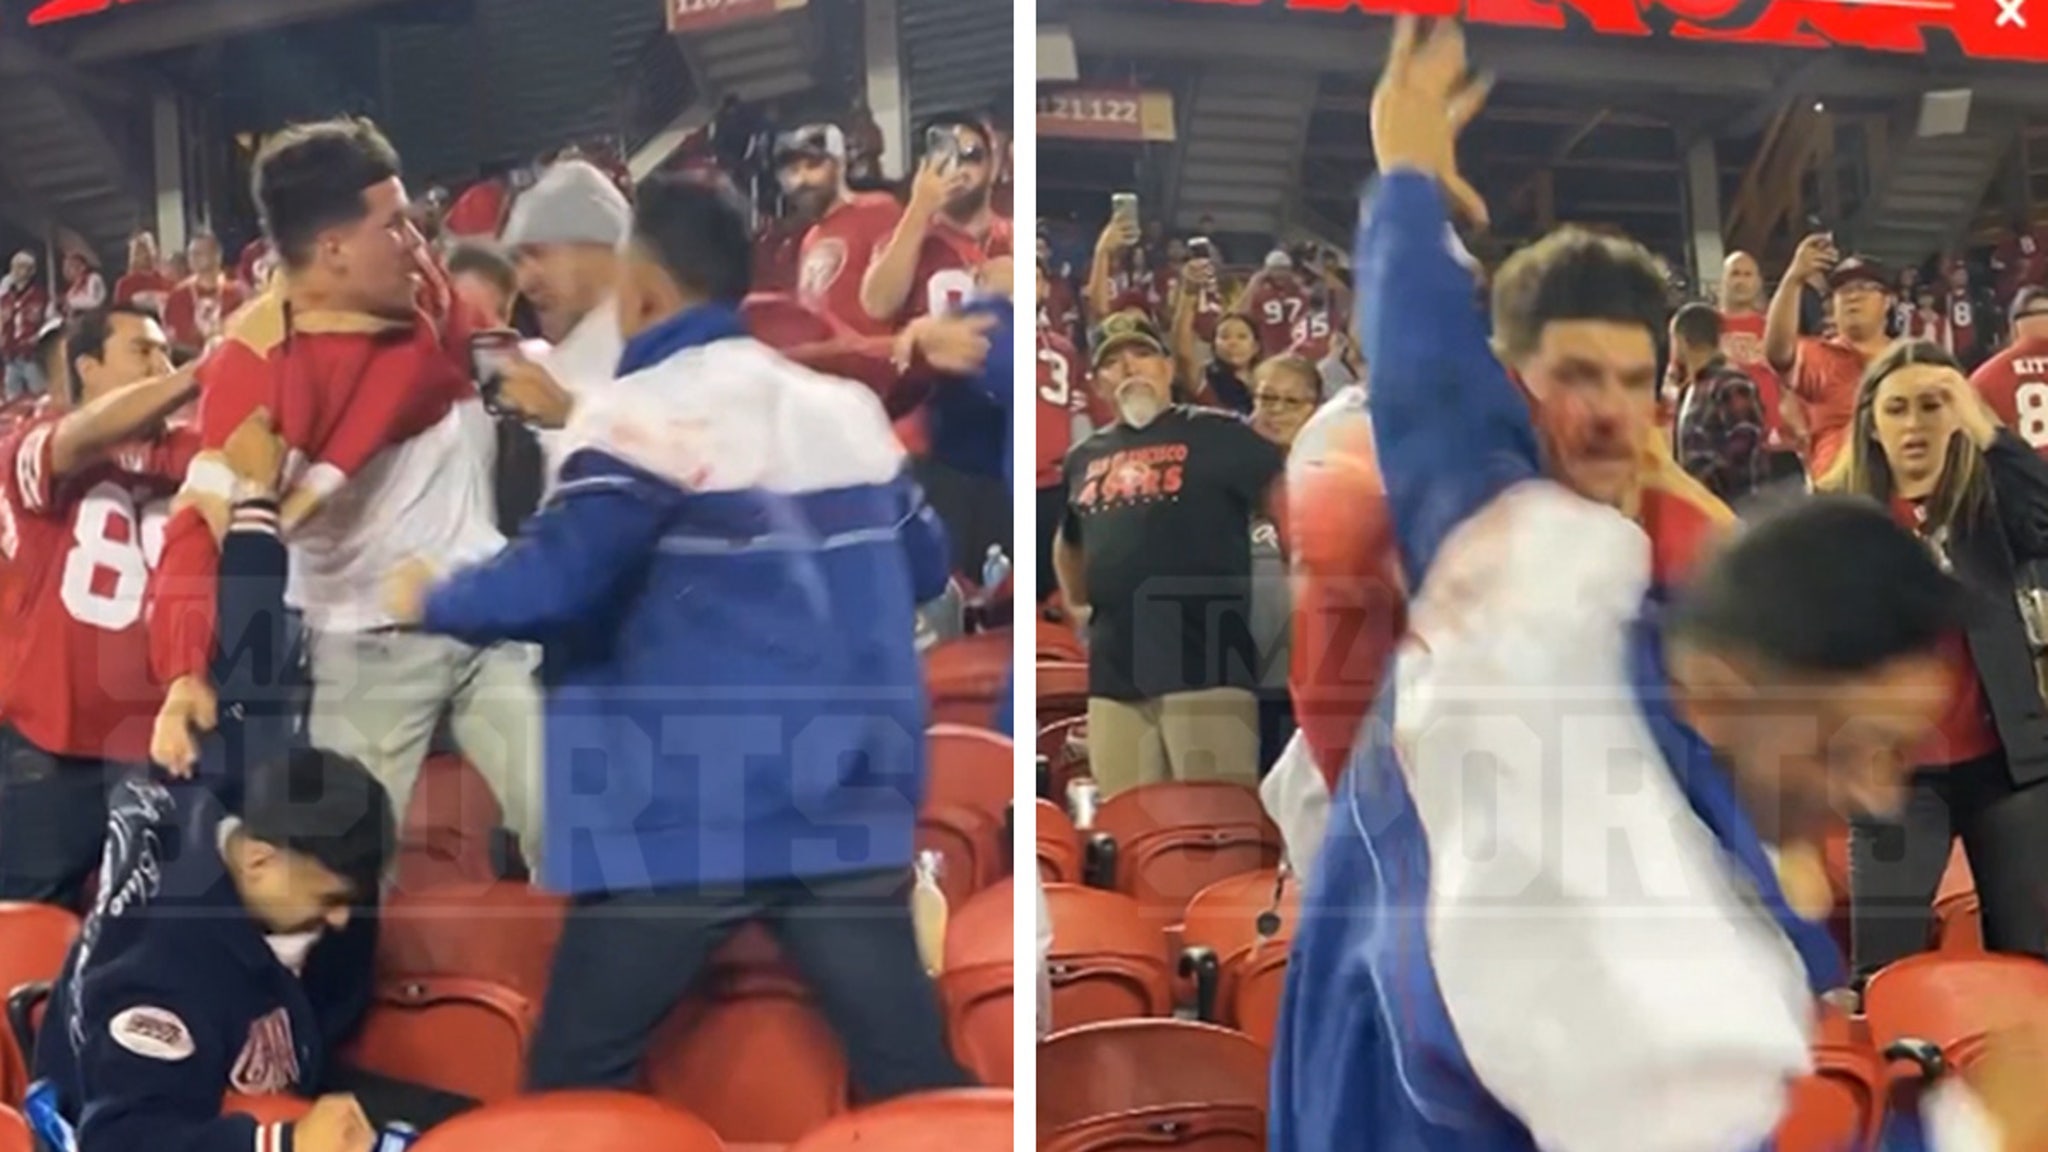 49ers Fans Bloodied In Wild Fight With Giants Supporters After ‘TNF’ Game